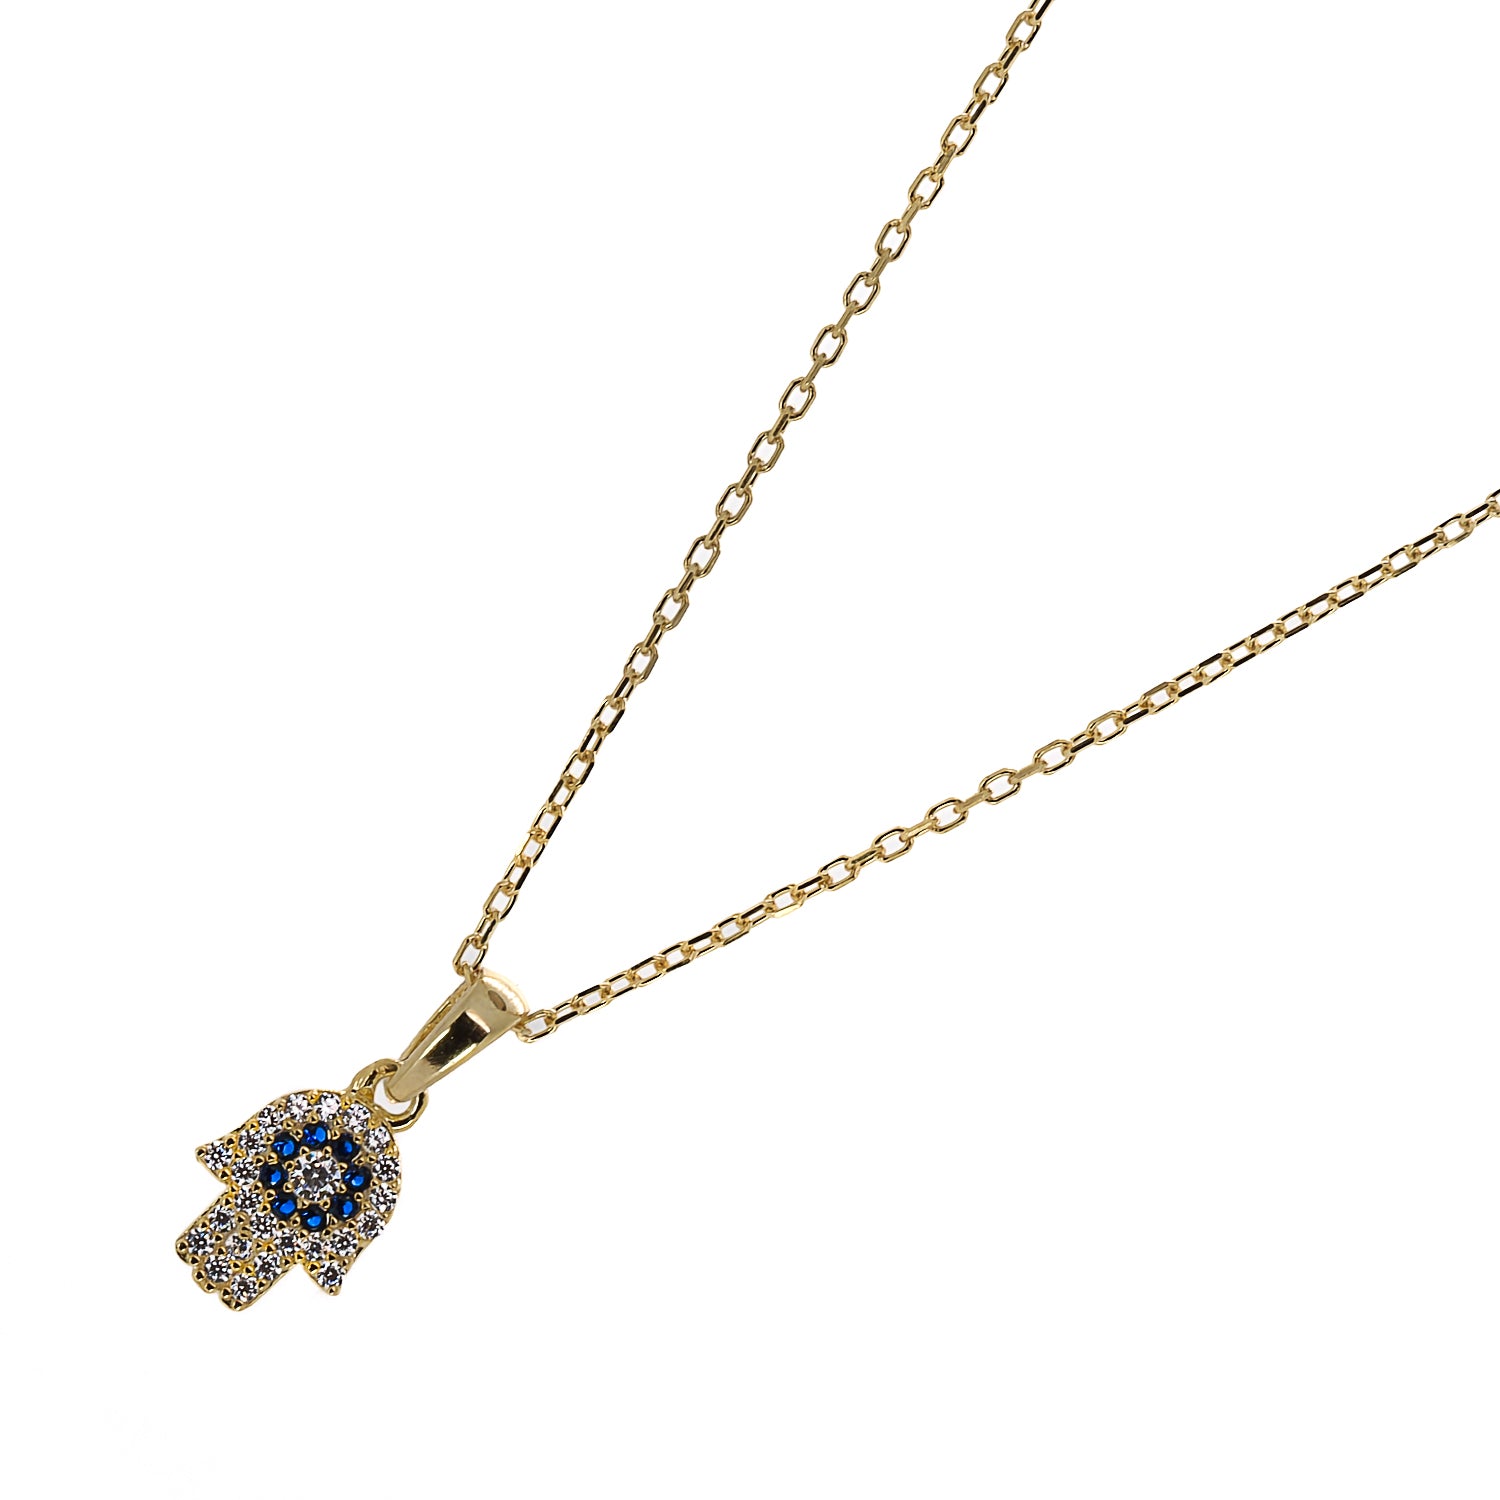 Hamsa Hand Pendant Necklace - Ancient Symbol of Protection and Blessings.